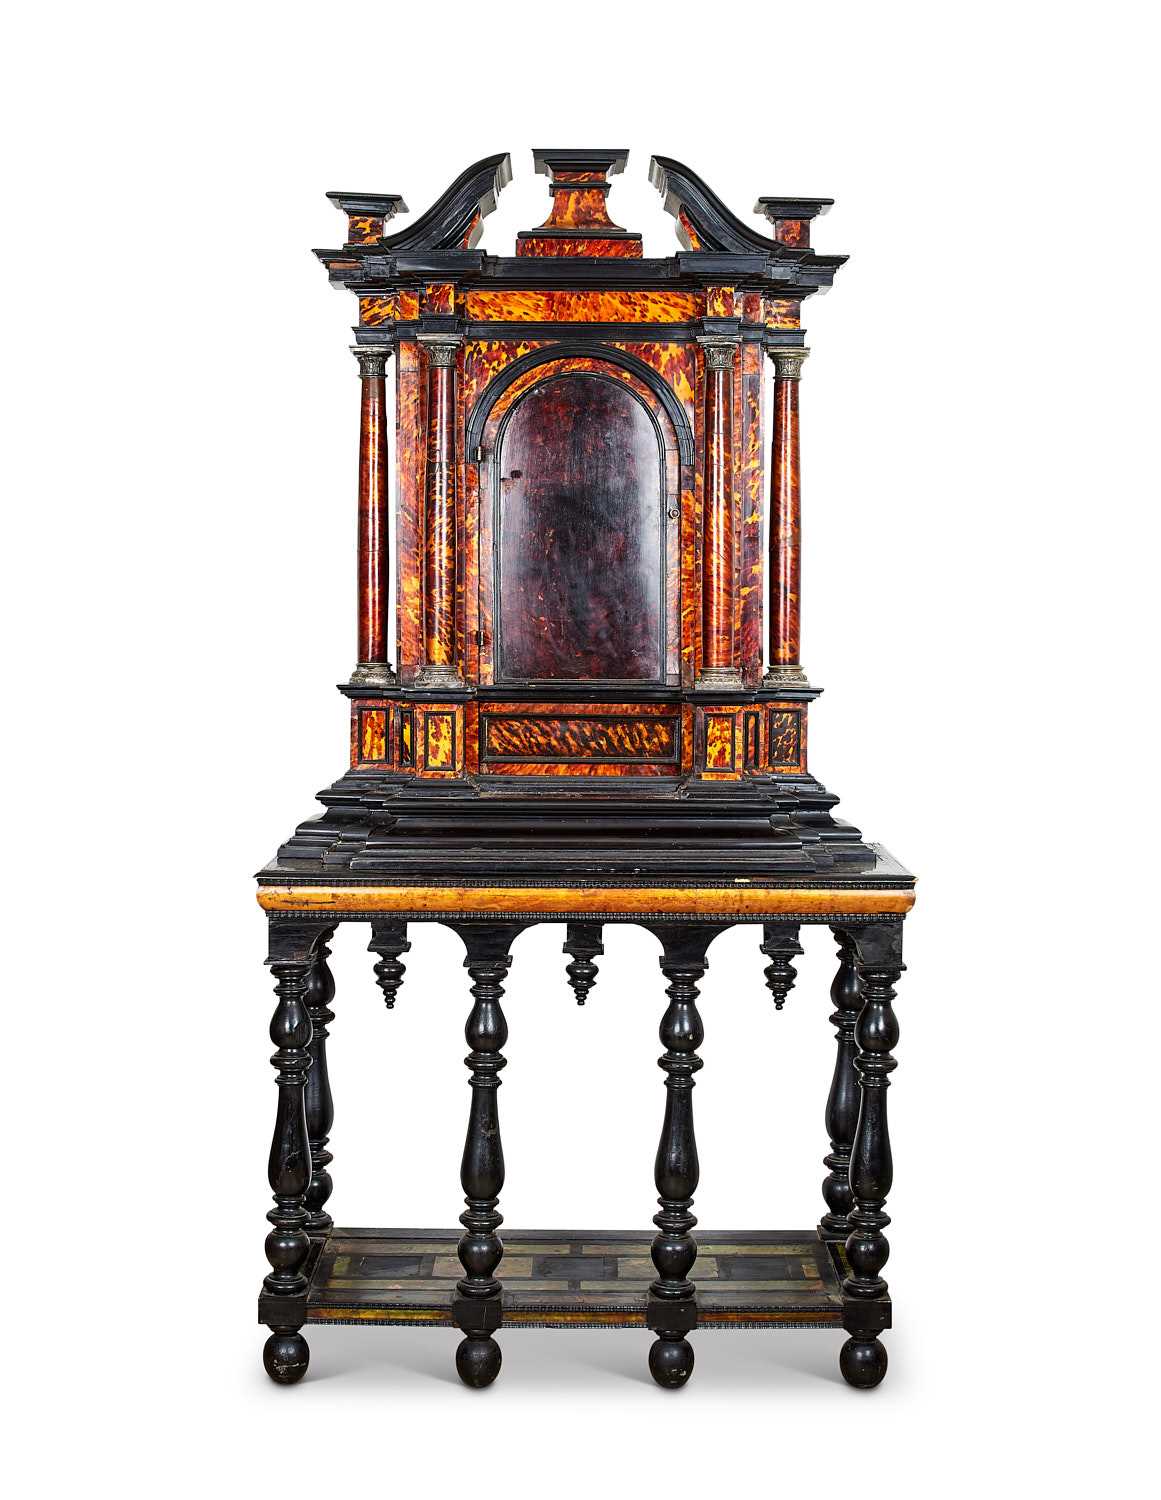 A LATE 17TH / EARLY 18TH CENTURY ITALIAN BAROQUE TORTOISESHELL CABINET ON LATER STAND